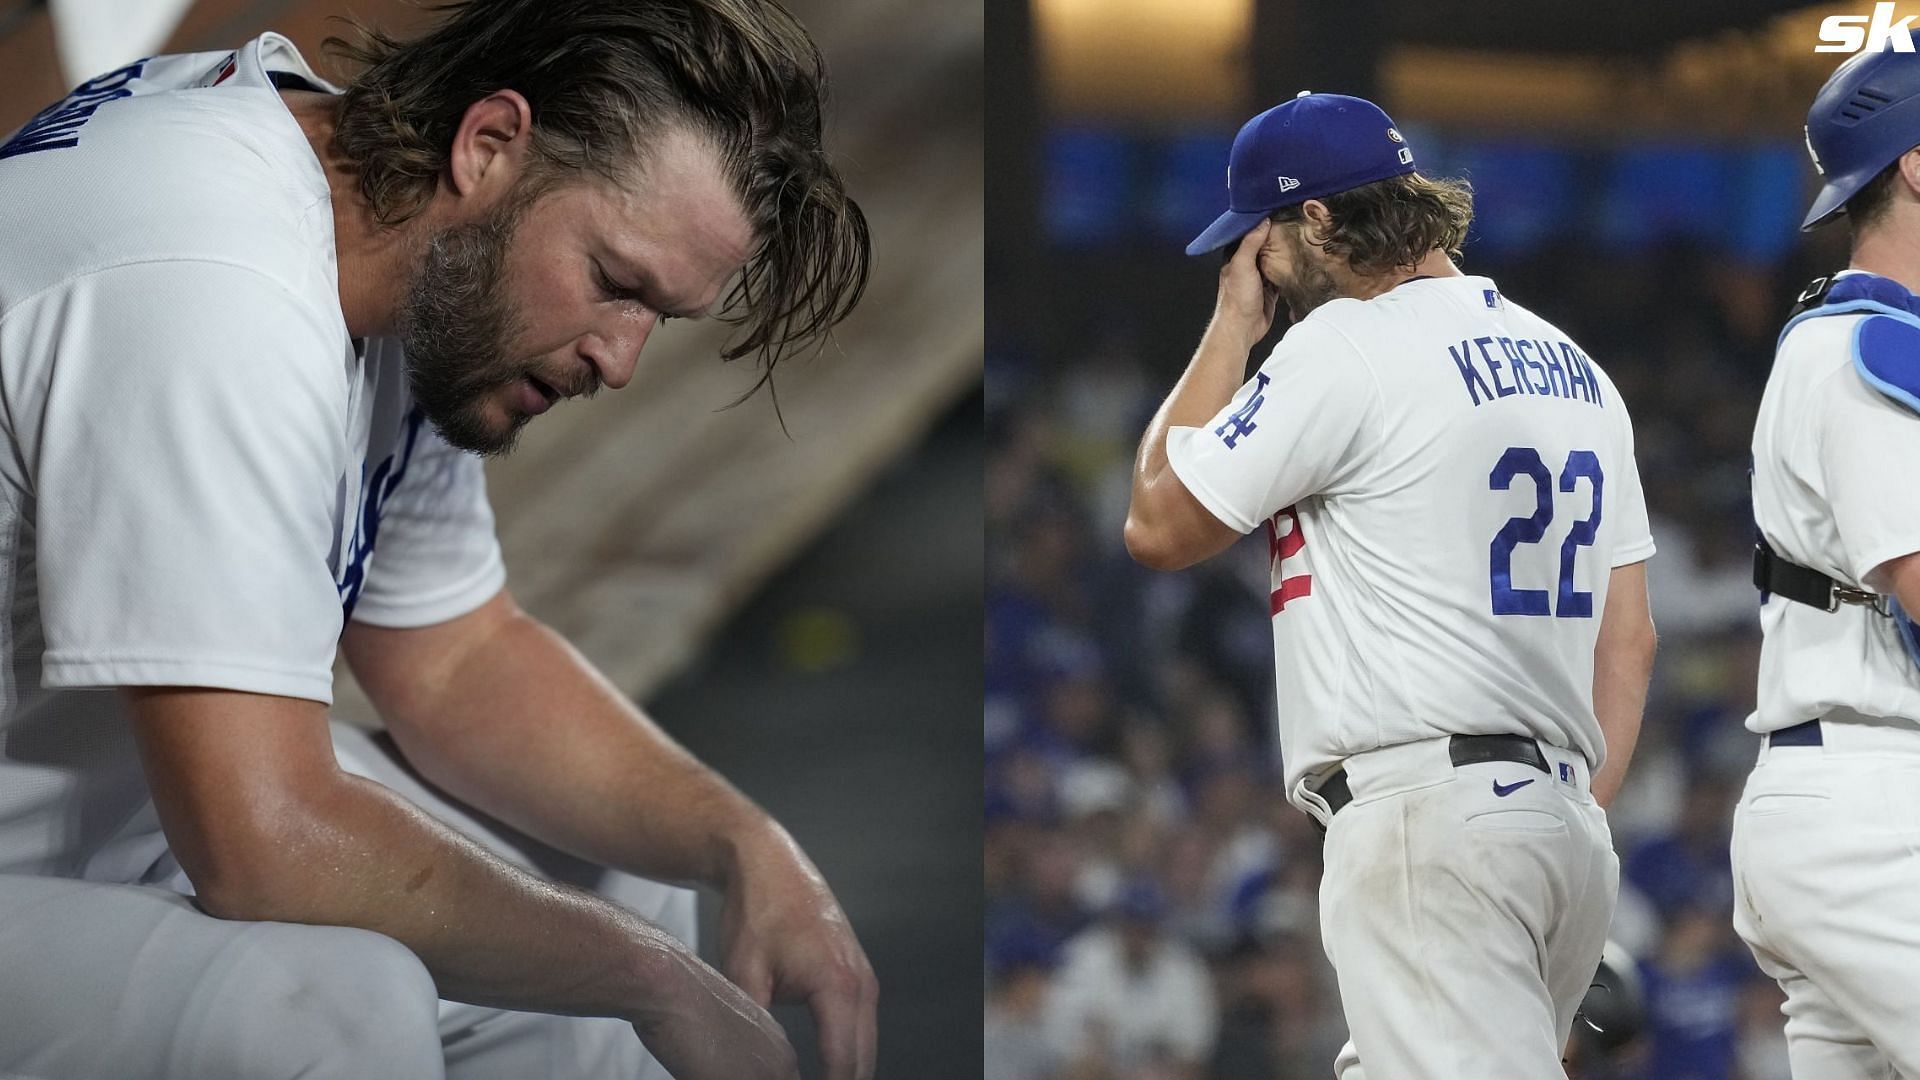 Dodgers fans are done with Clayton Kershaw after ace's disastrous